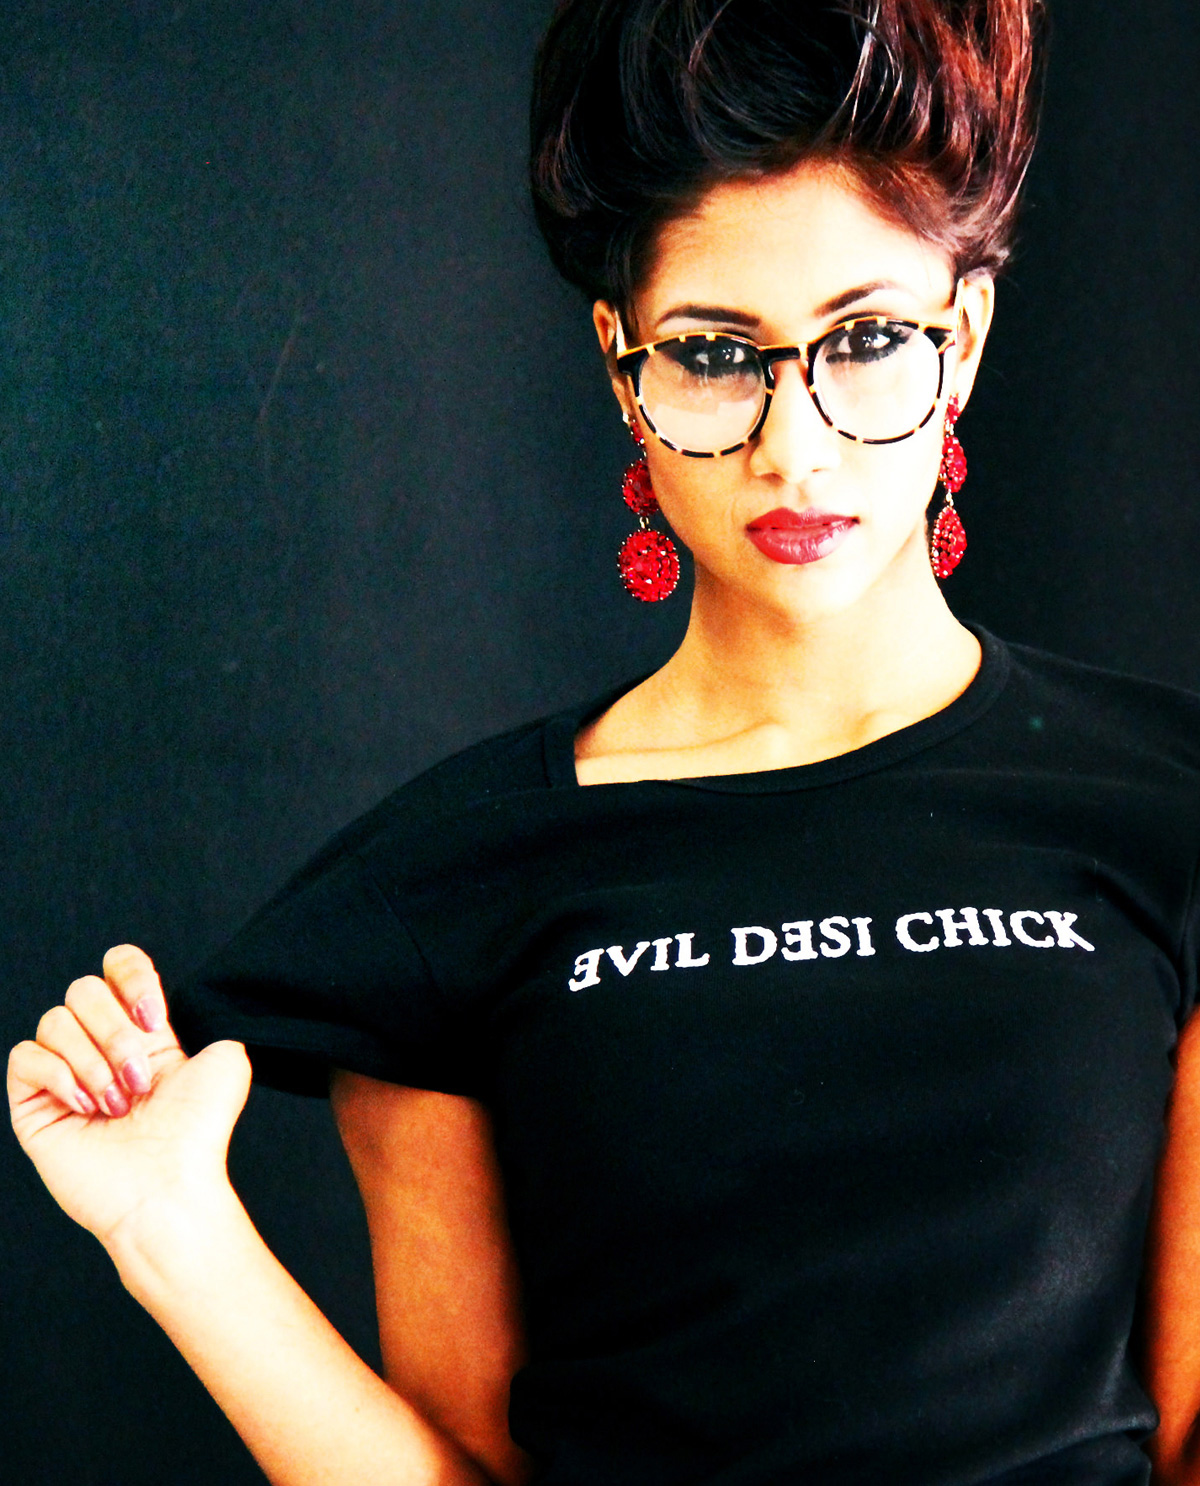 South Asian Female model wearing black fitted American Apparel t.shirt for women with Evil Desi Chick silkscreened on the front.